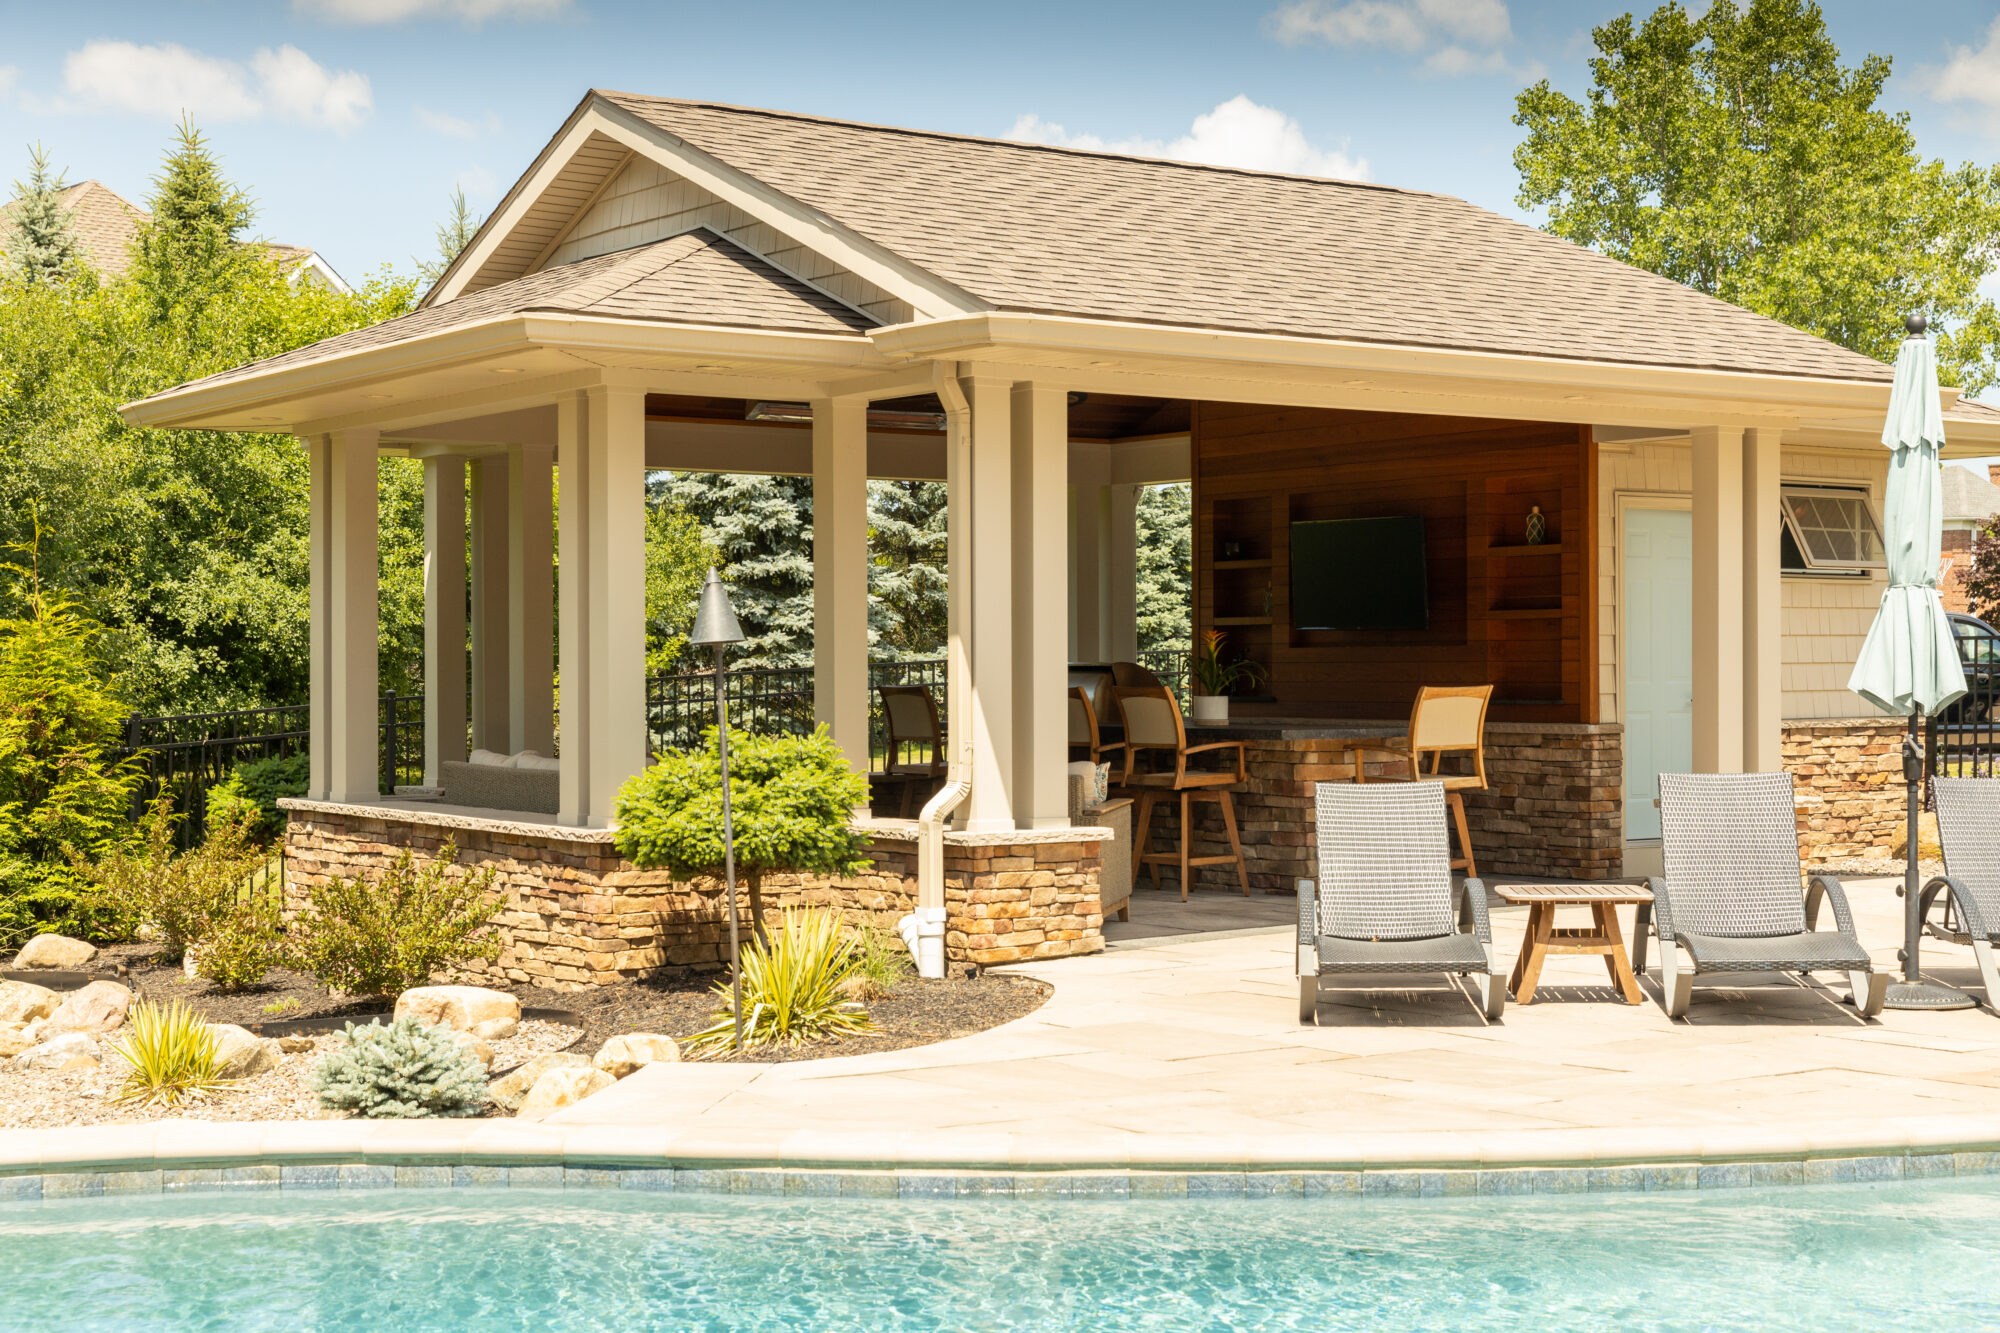 Covered patio space by an inground pool featuring a fully-equipped cooking station, comfortable bar seating, and stylish stone walls enhanced with rich wooden accents